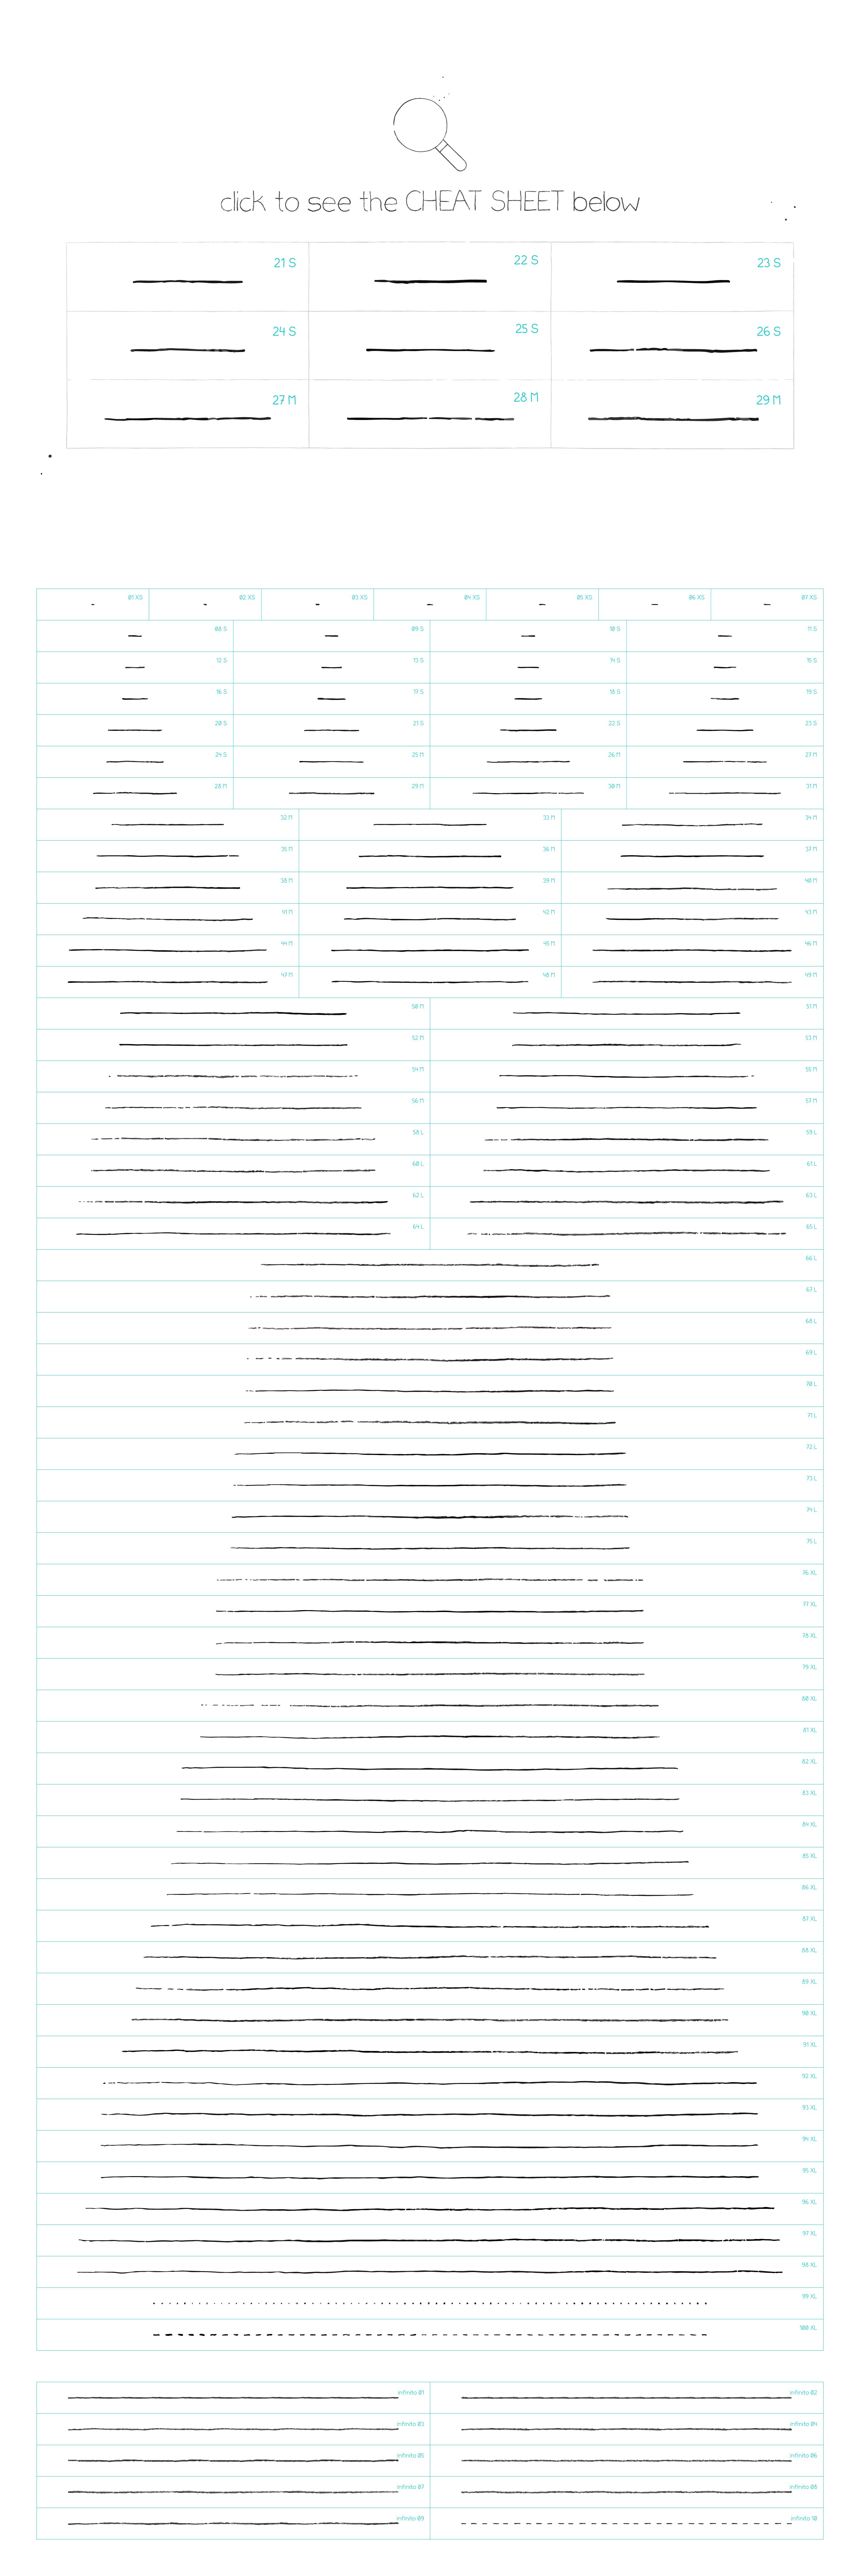 mechanical pencil brushes preview 00 cheatsheet 407